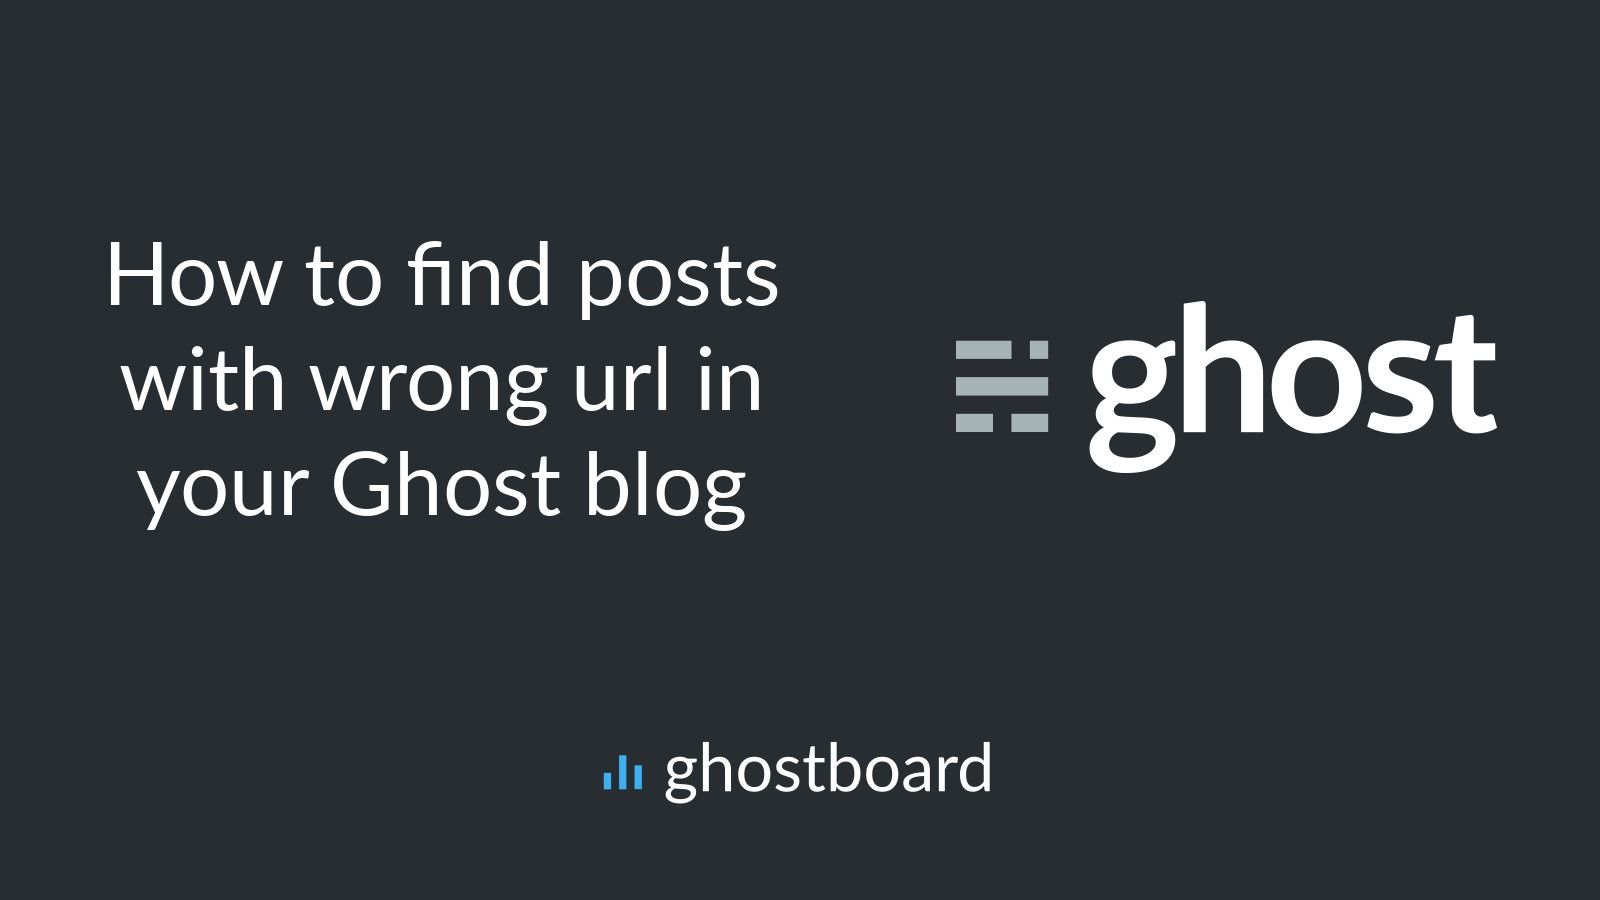 How to find posts with wrong url in your Ghost blog